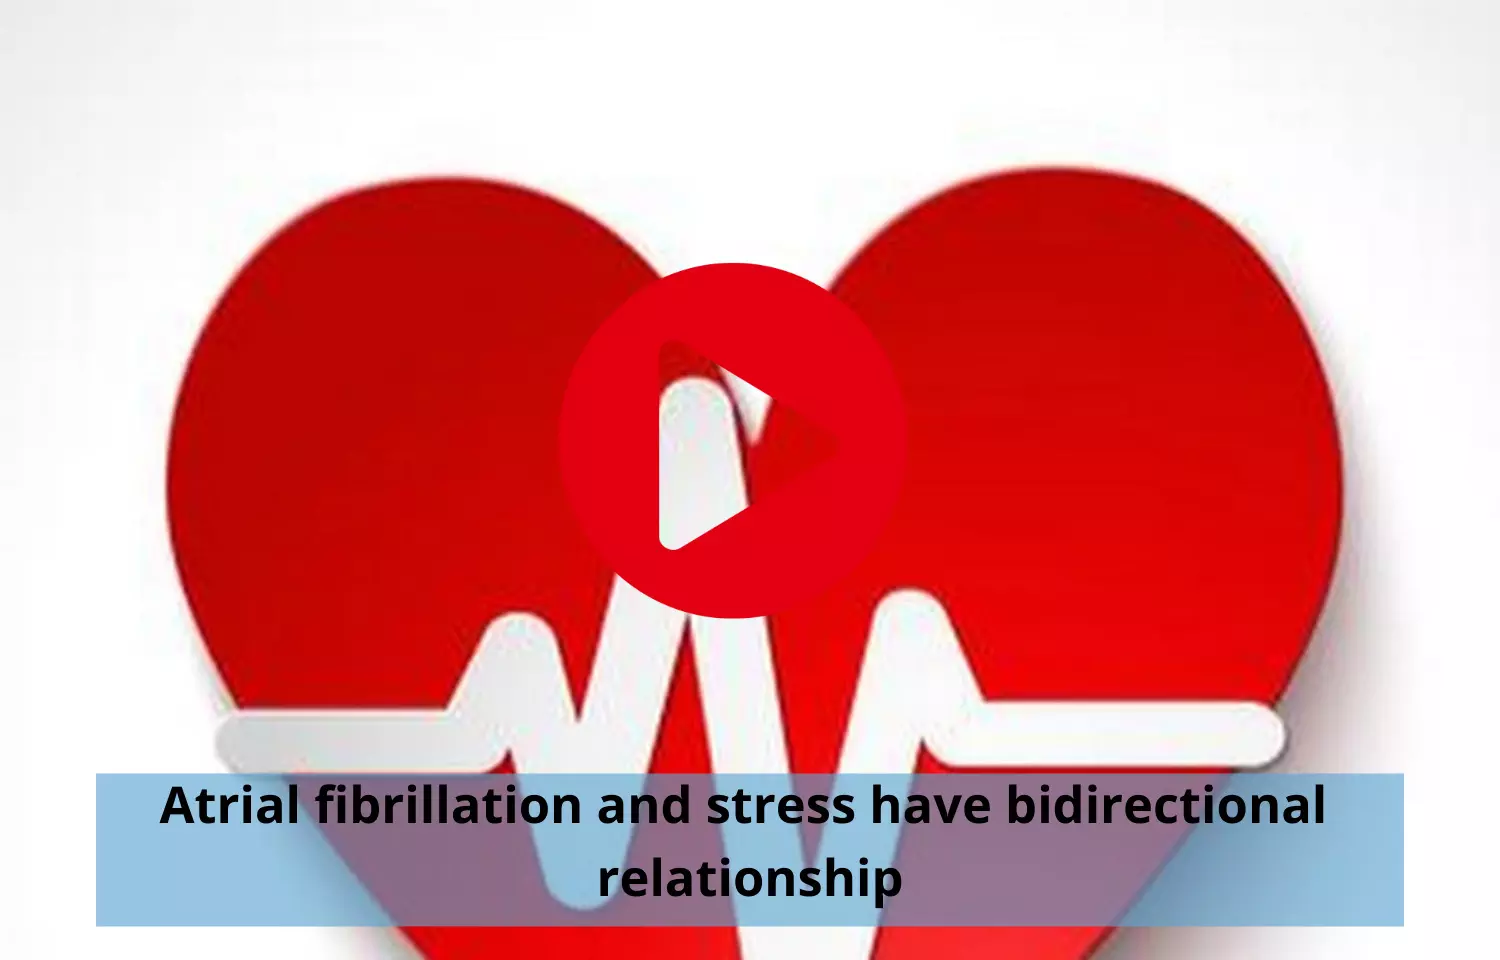 Atrial fibrillation and stress to have bidirectional relationship